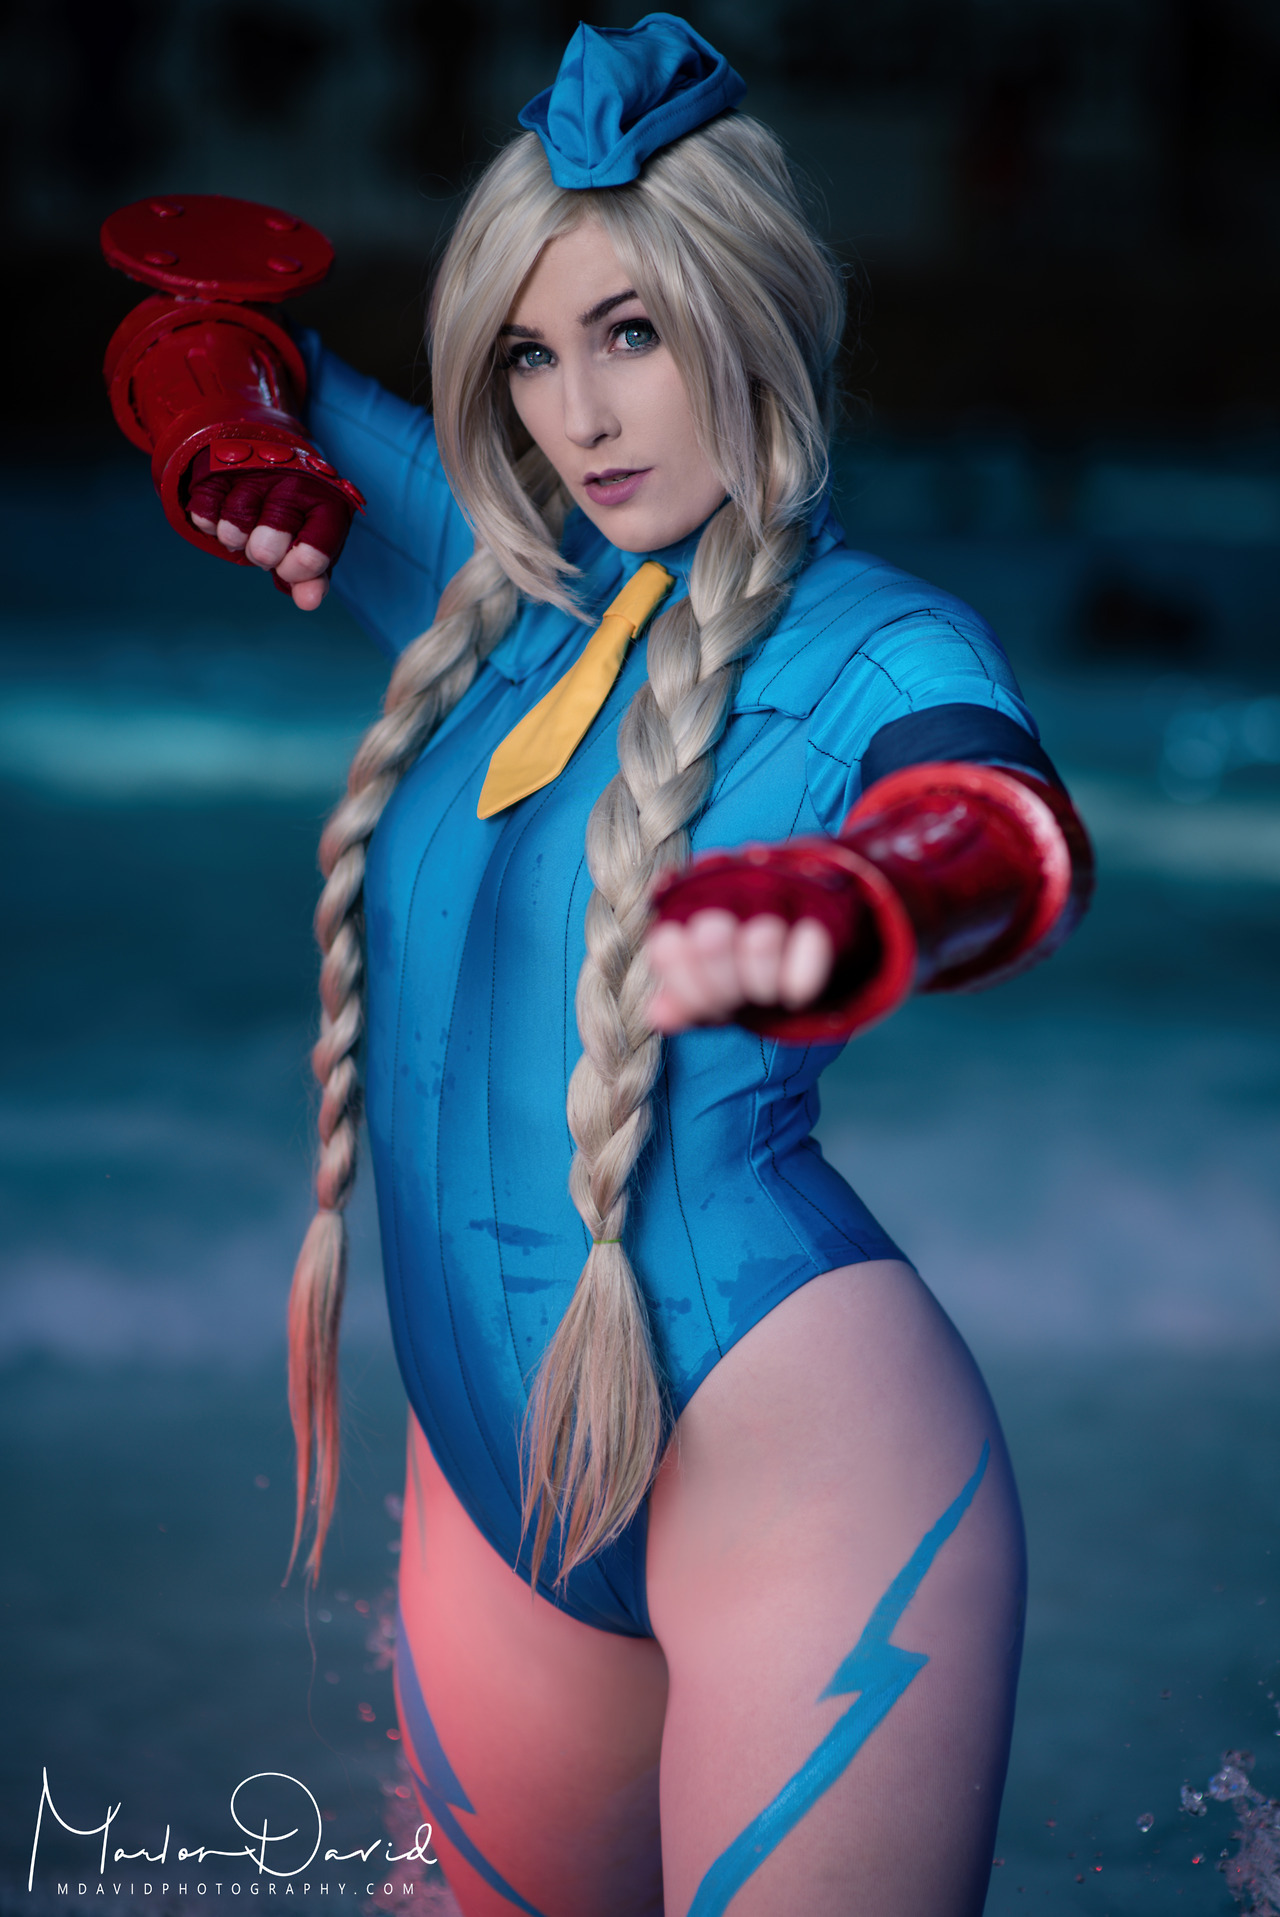 more cammy? MORE CAMMY!all photos thank to https://www.facebook.com/mdavidphotography/ you